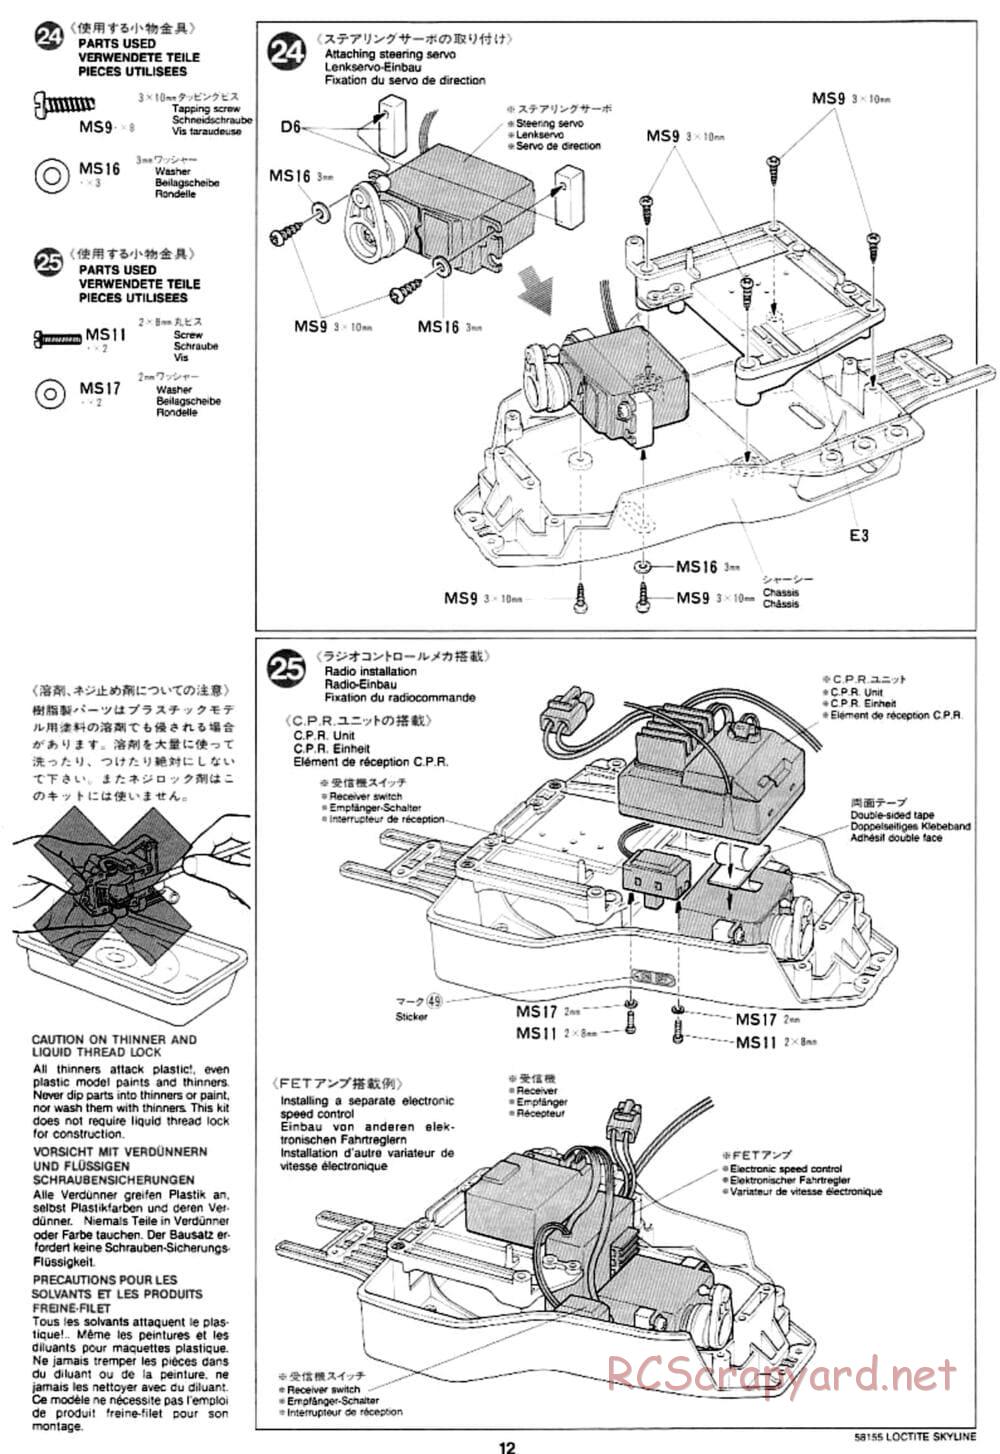 Tamiya - Loctite Nissan Skyline GT-R N1 - TA-02 Chassis - Manual - Page 12